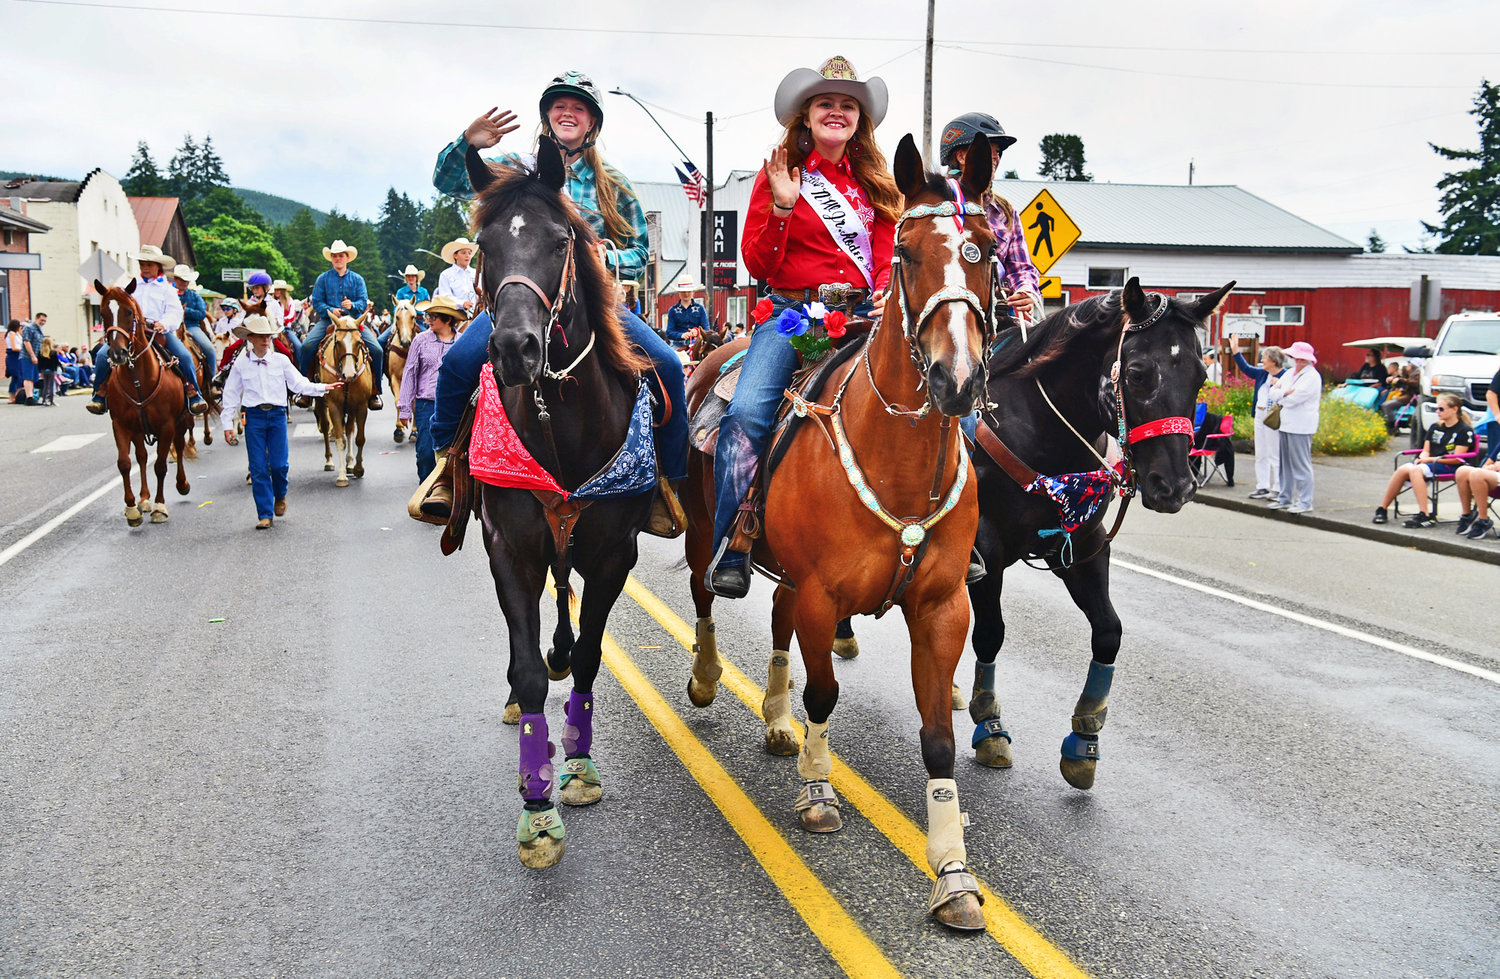 A whole corral’s worth of horses and riders participated in Oakville’s Independence Day parade on Saturday, July 3. The riders, affiliated with the Northwest Junior Rodeo Association, participate in rodeos throughout the region.